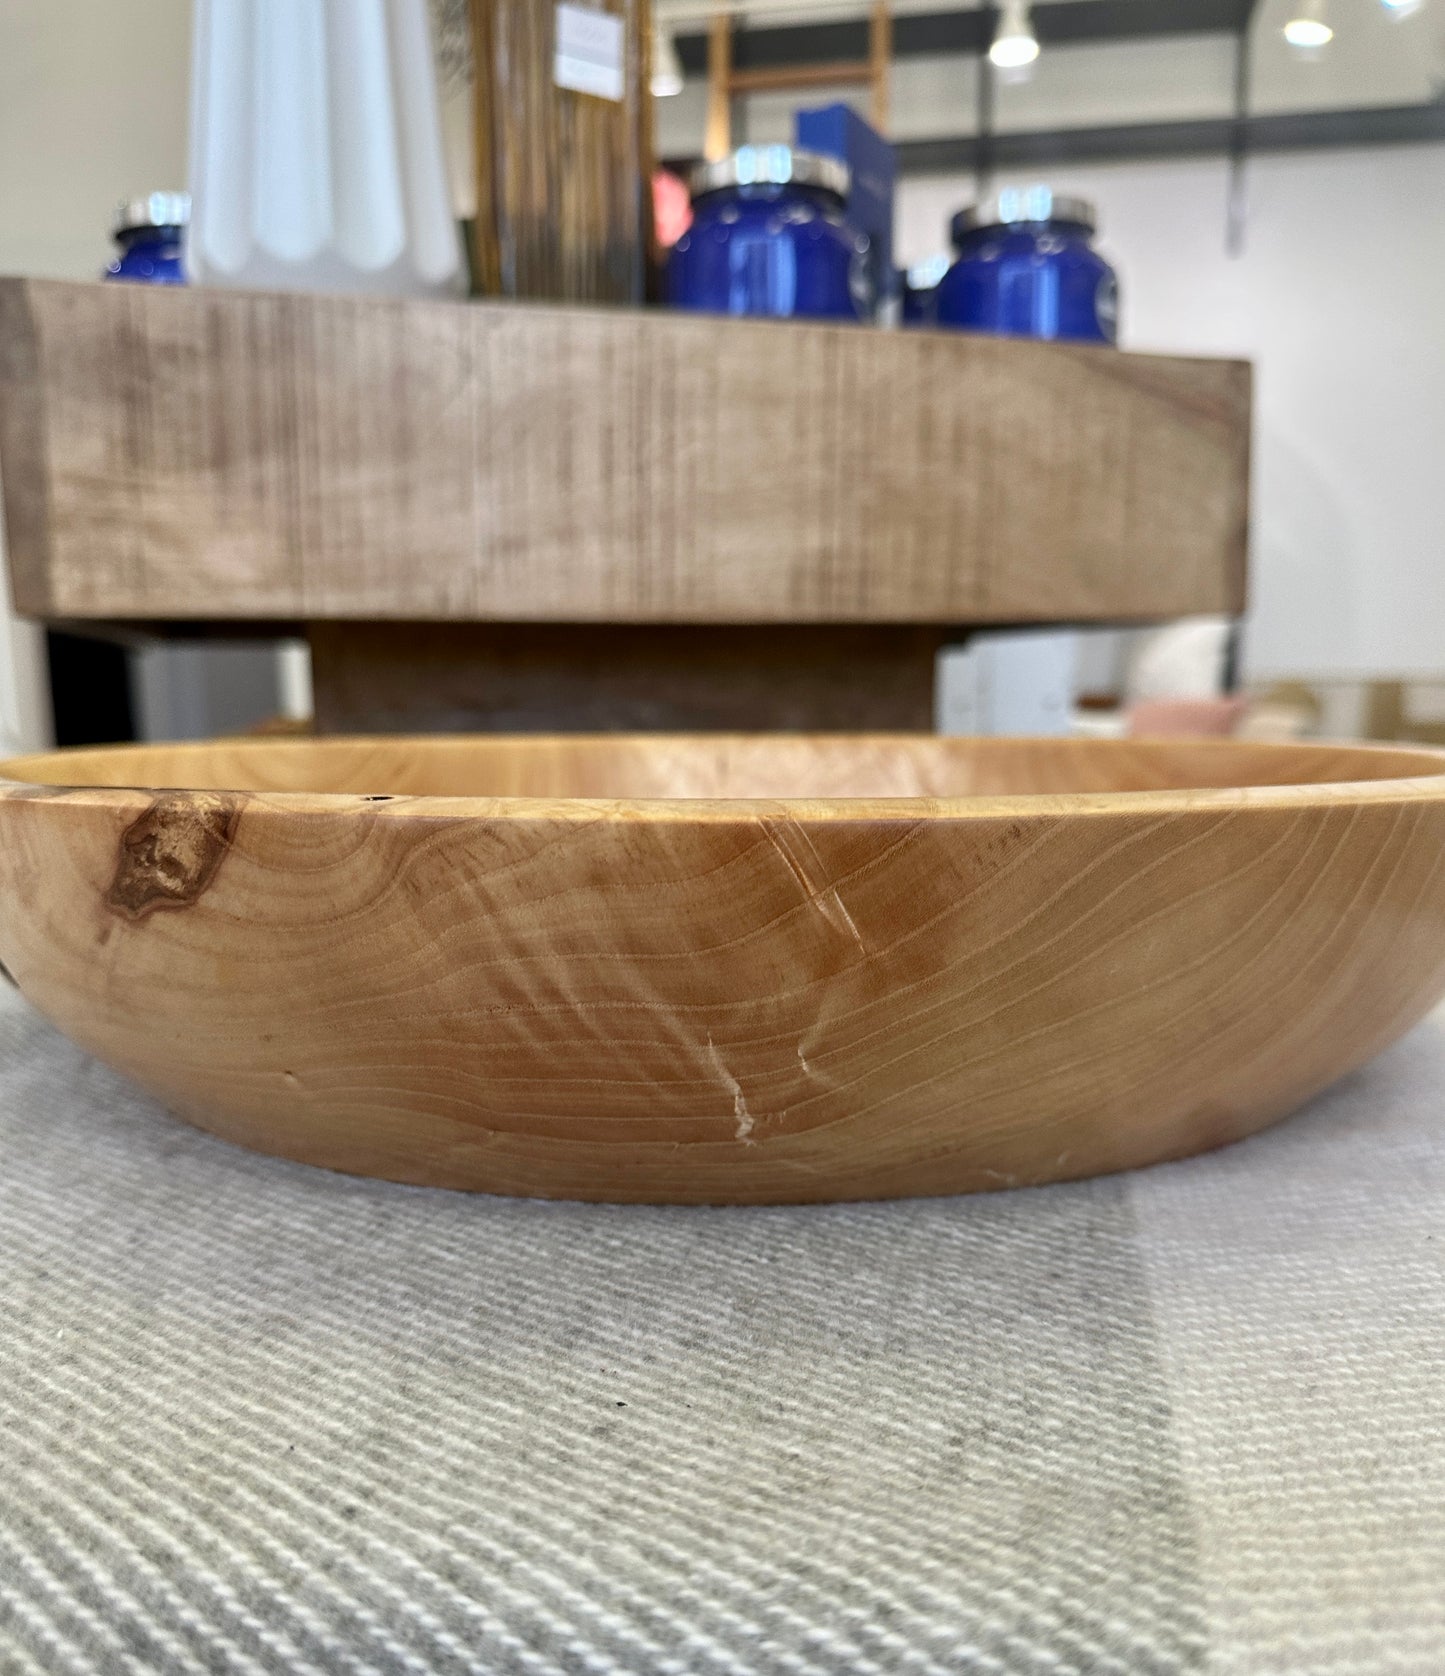 Handcrafted Ash Wood Bowl, 15 inch diameter